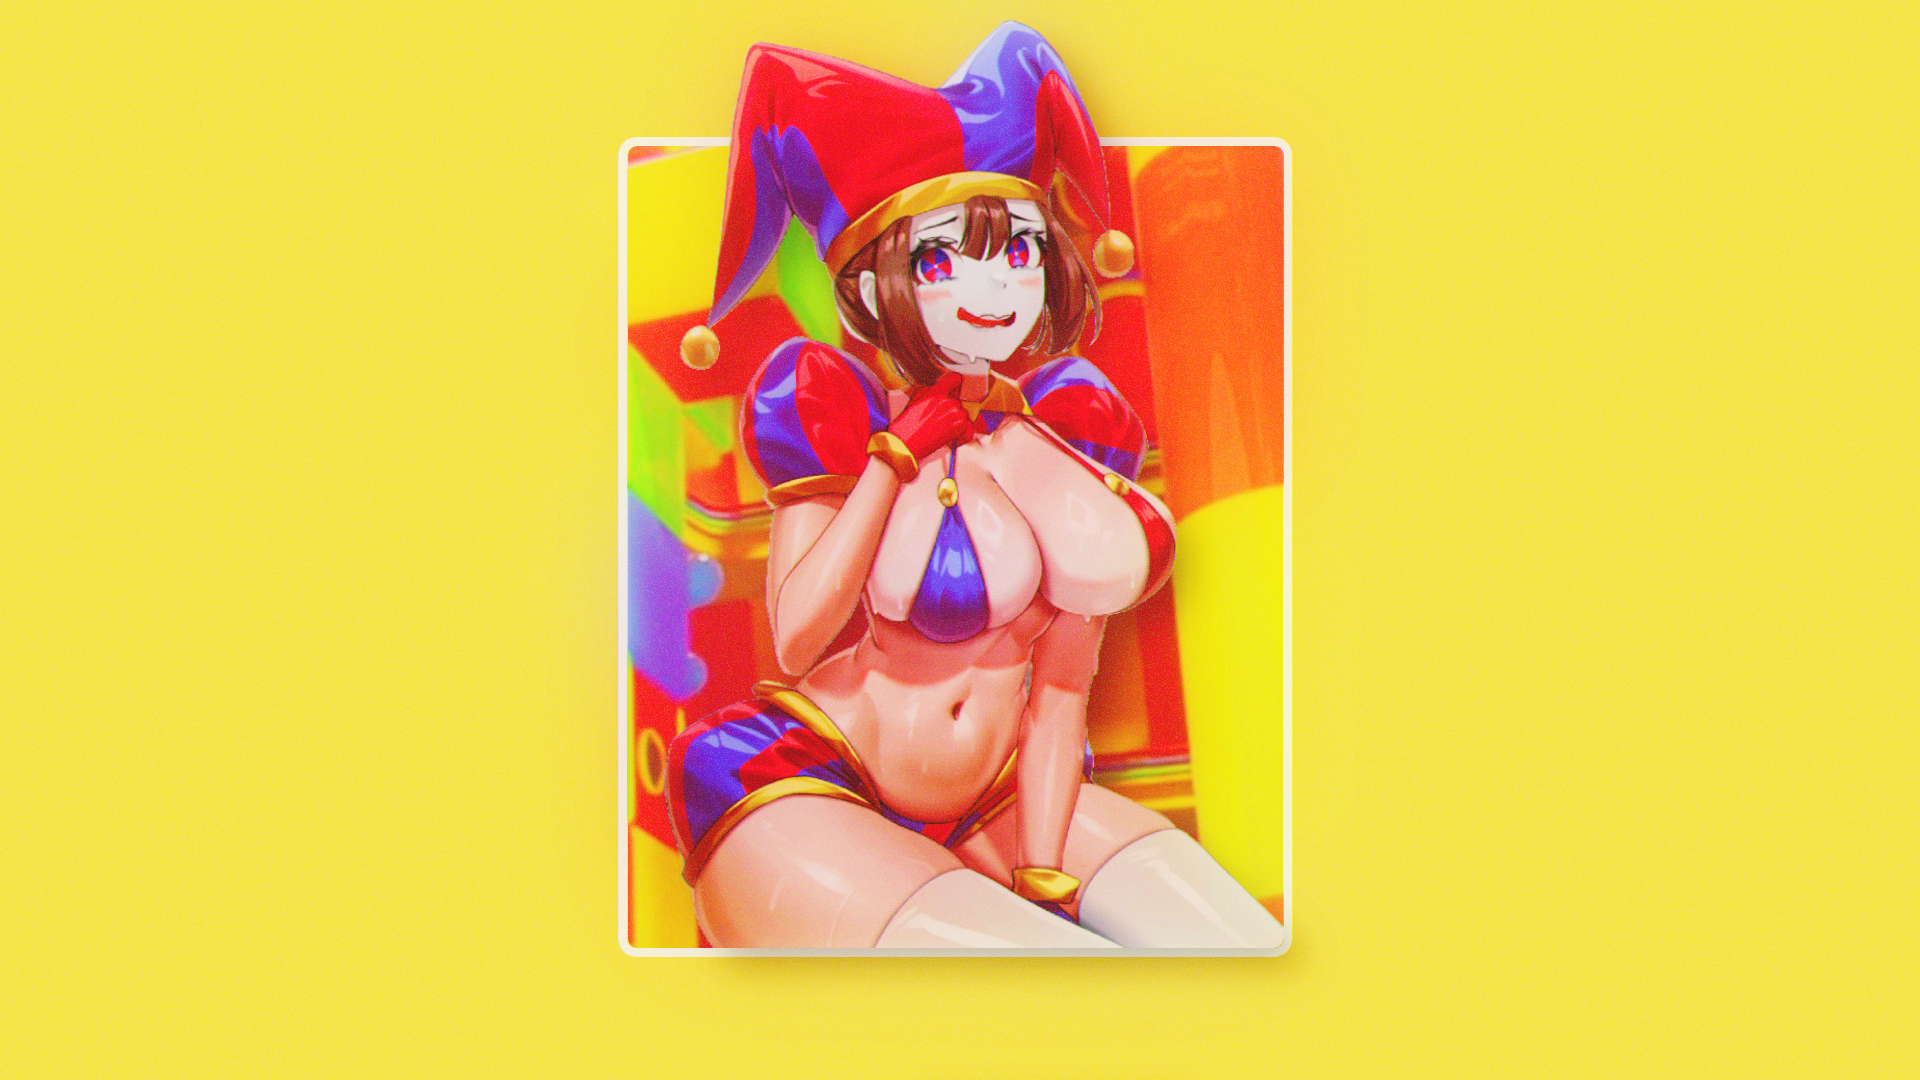 Anime 1920x1080 anime anime girls The Amazing Digital Circus Pomni minimalism picture-in-picture smiling simple background hat big boobs short hair blushing gloves jester yellow background looking at viewer thighs belly belly button brunette